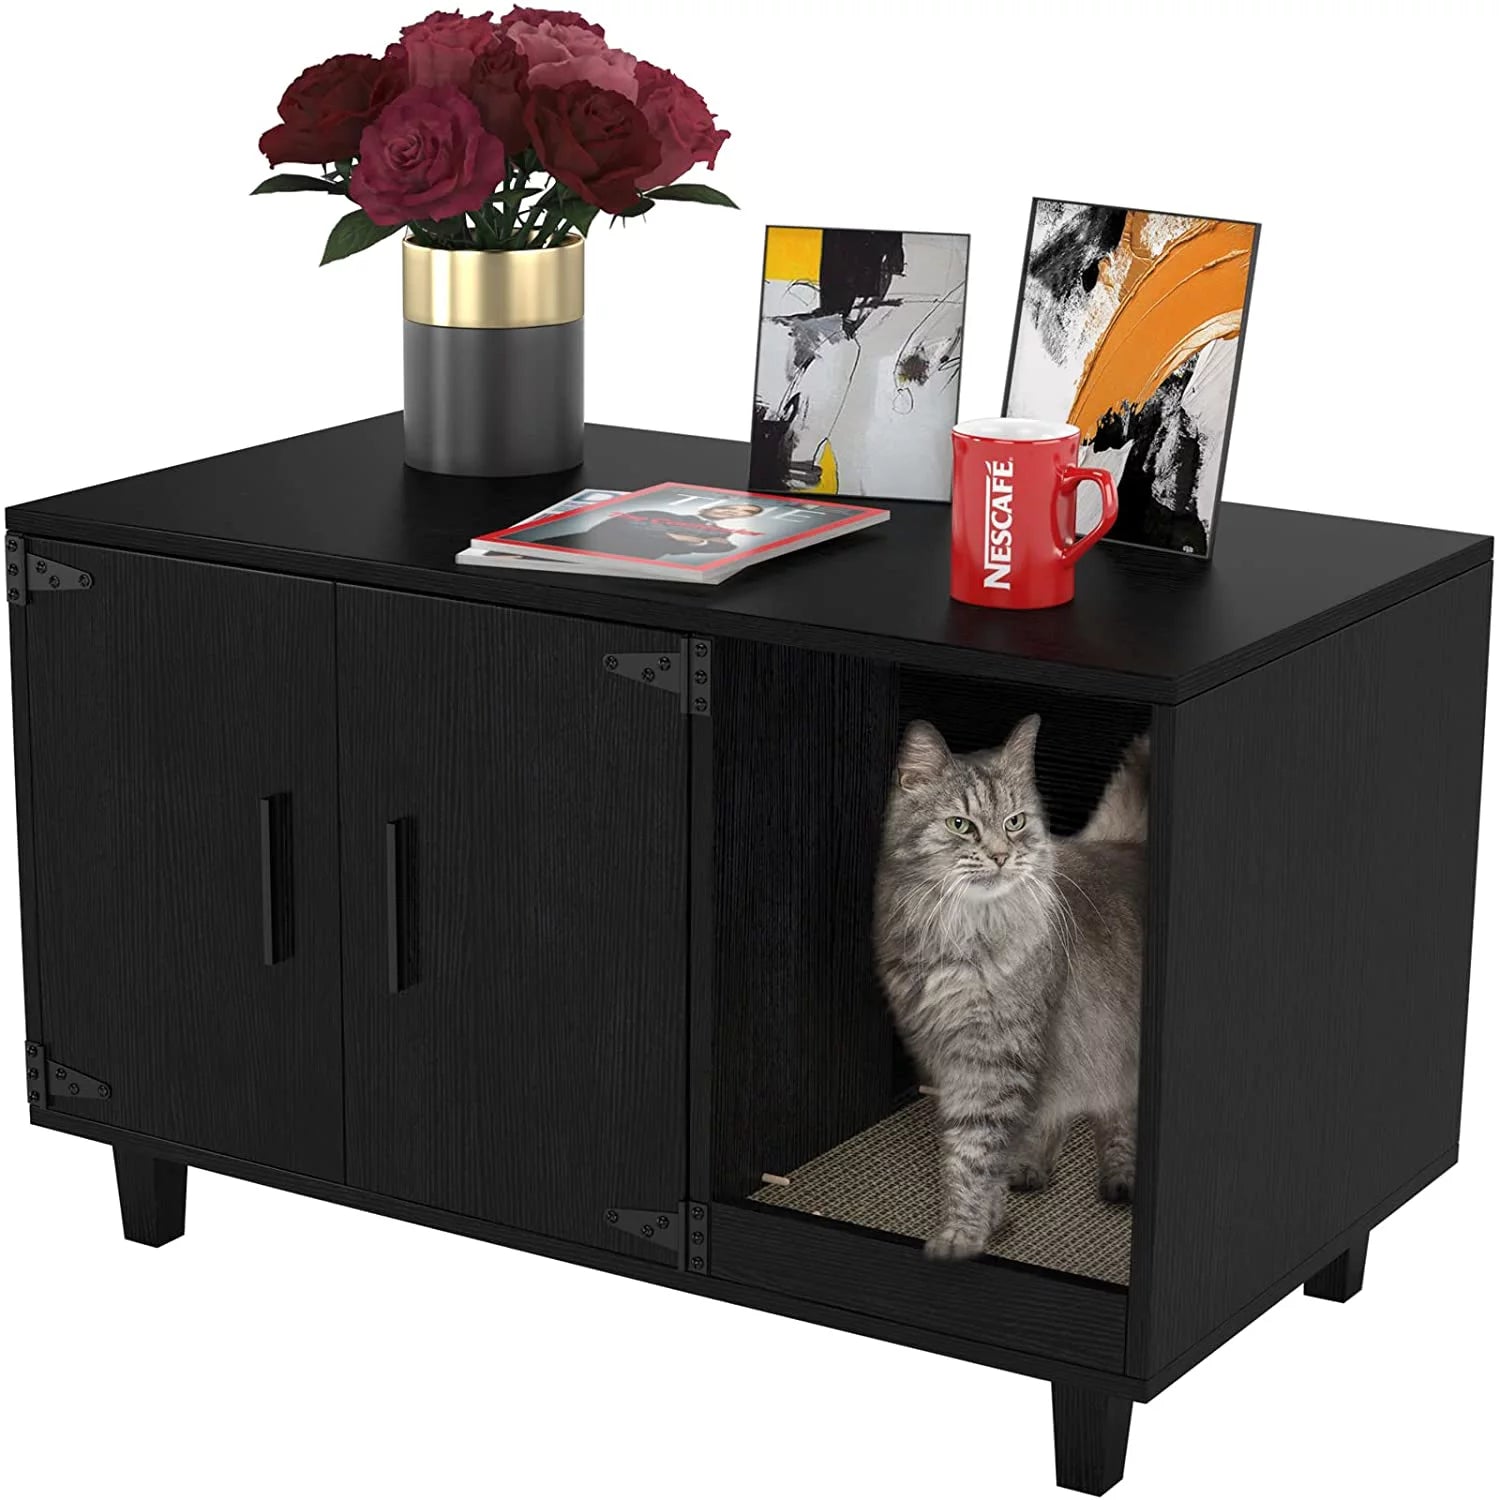 GDLF Pet Crate Cat Washroom Hidden Litter Box Enclosure as Table Nightstand with Scratch Pad,Stackable Animals & Pet Supplies > Pet Supplies > Cat Supplies > Cat Furniture GDLF Black  